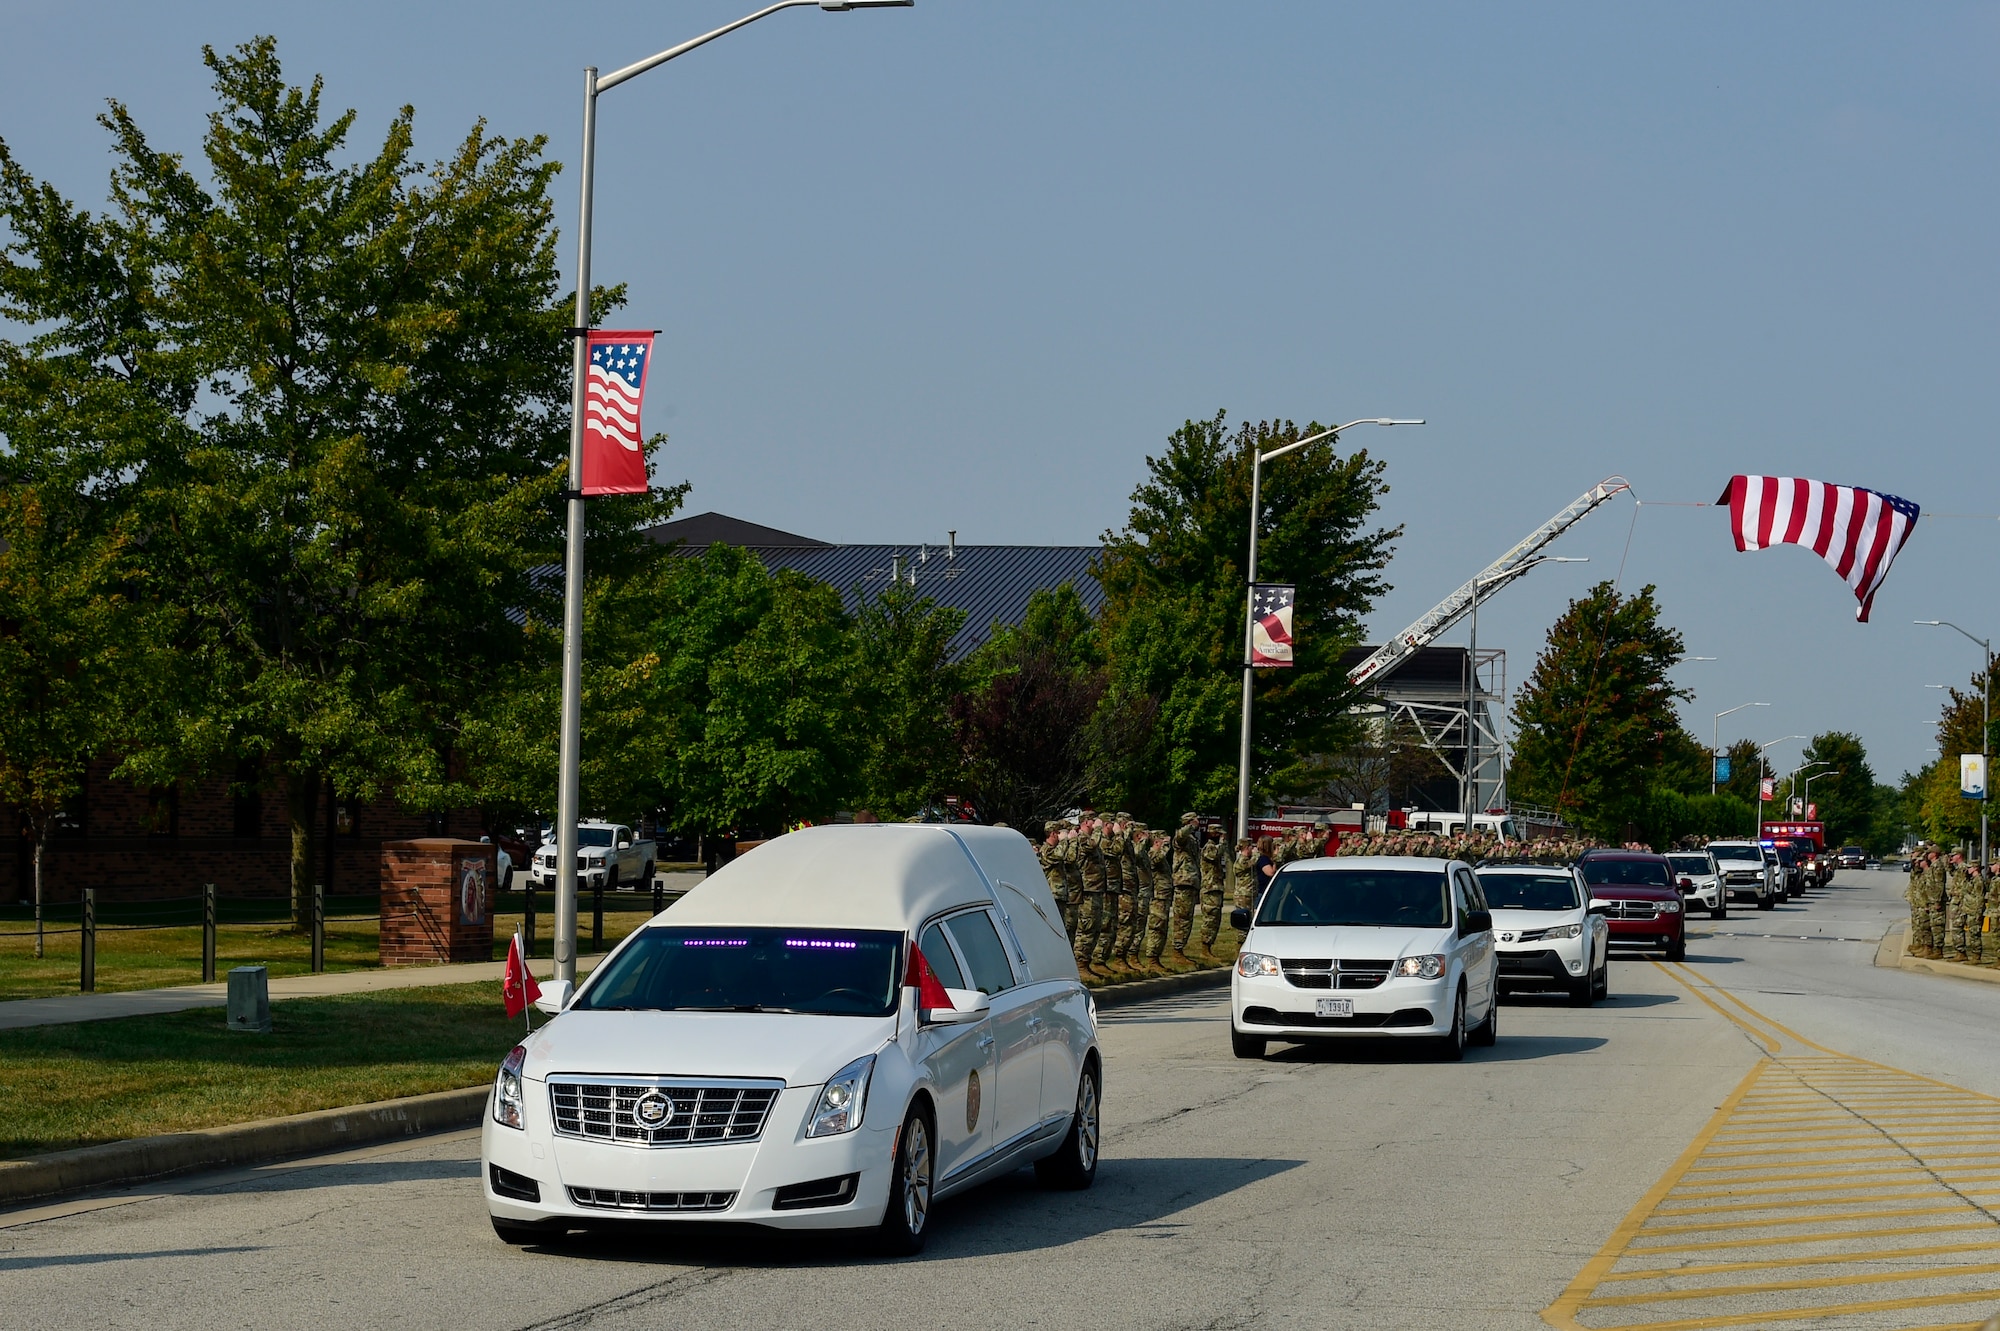 Members of the Hoosier Wing line the road and render a salute as the hearse transporting the remains of U.S. Marine Corps Cpl. Humberto A. Sanchez of Logansport, Indiana, passes by Sept. 12, 2021 at Grissom Air Reserve Base, Indiana. Sanchez was one of 13 U.S. service members killed Aug. 26, 2021, as the result of an enemy attack while supporting evacuation efforts for Operation Freedom’s Sentinel in Kabul, Afghanistan. (U.S. Air Force photo by Staff Sgt. Jeremy Blocker)